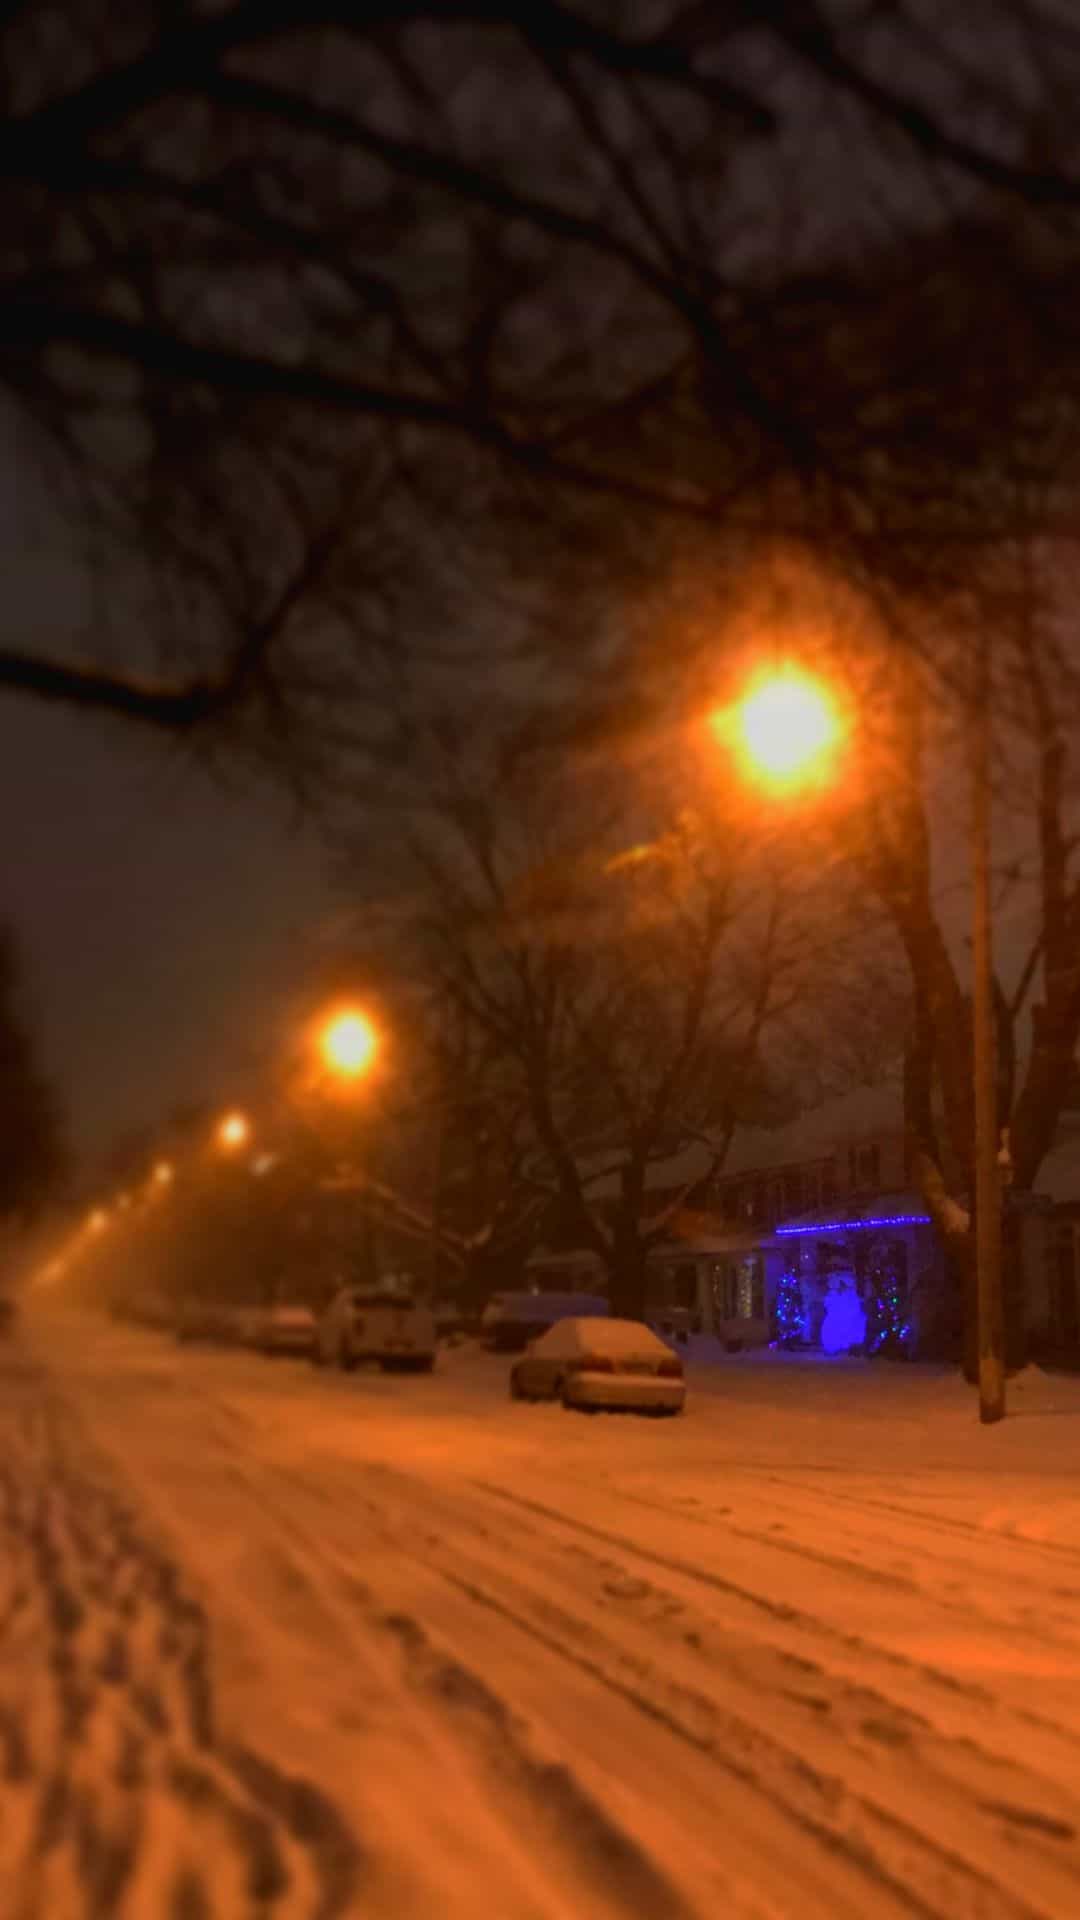 A street is covered in snow and has lights on - Christmas lights